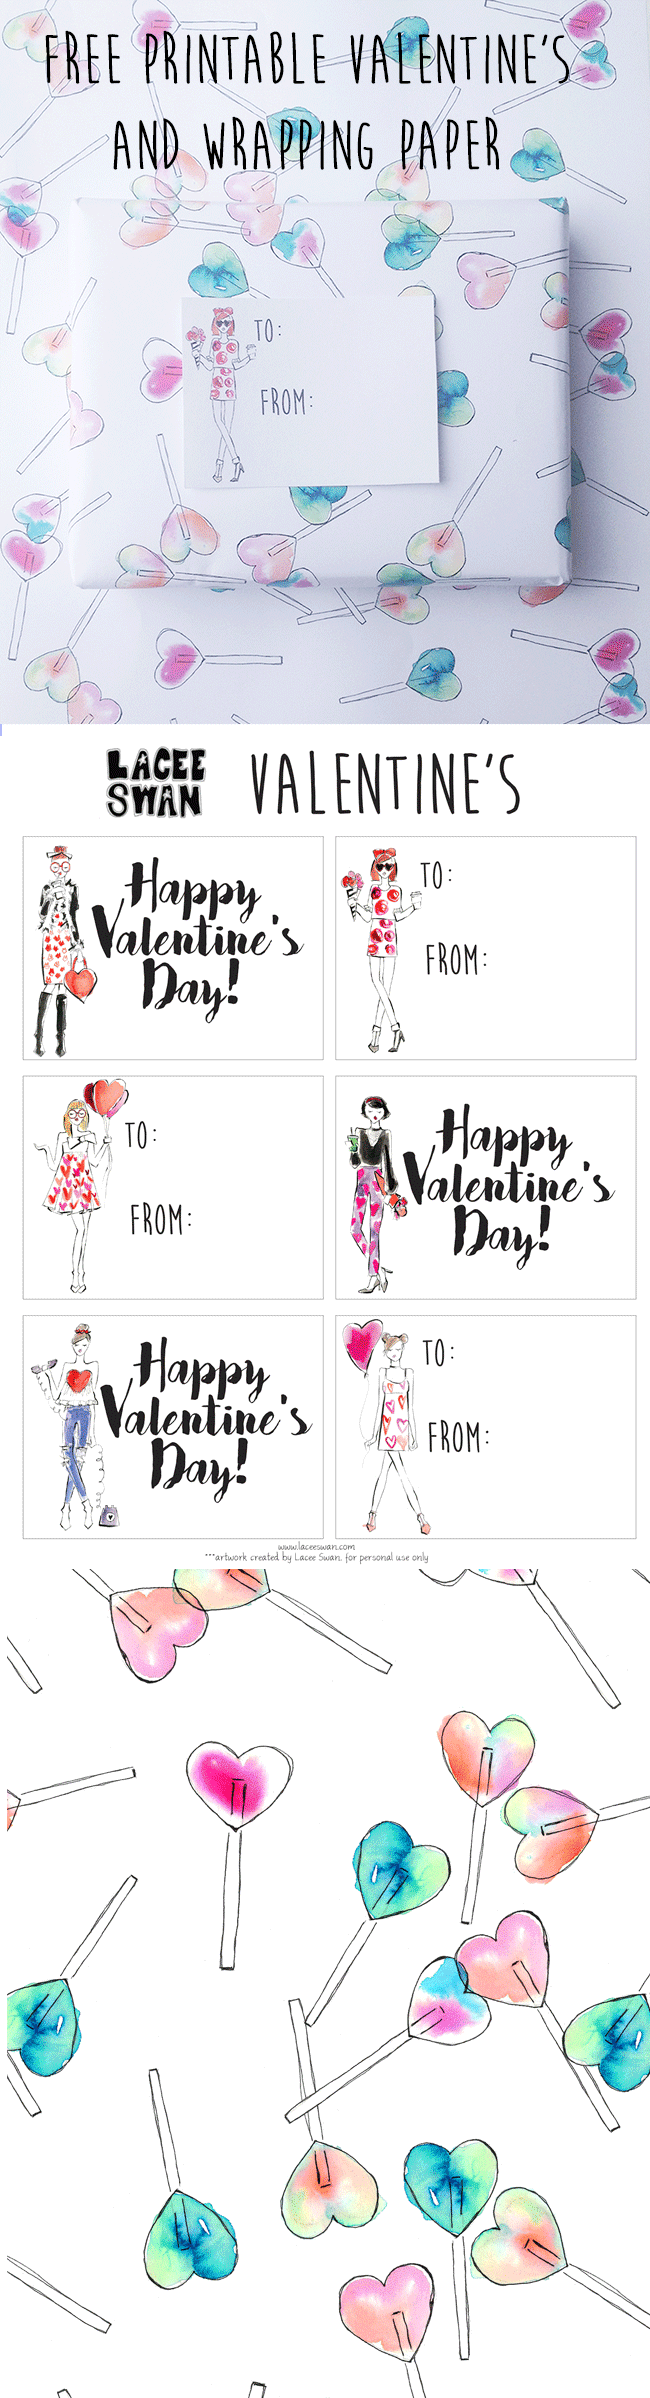 Free-Printable-Valentine-Wrapping-Paper-_-Lacee-Swan